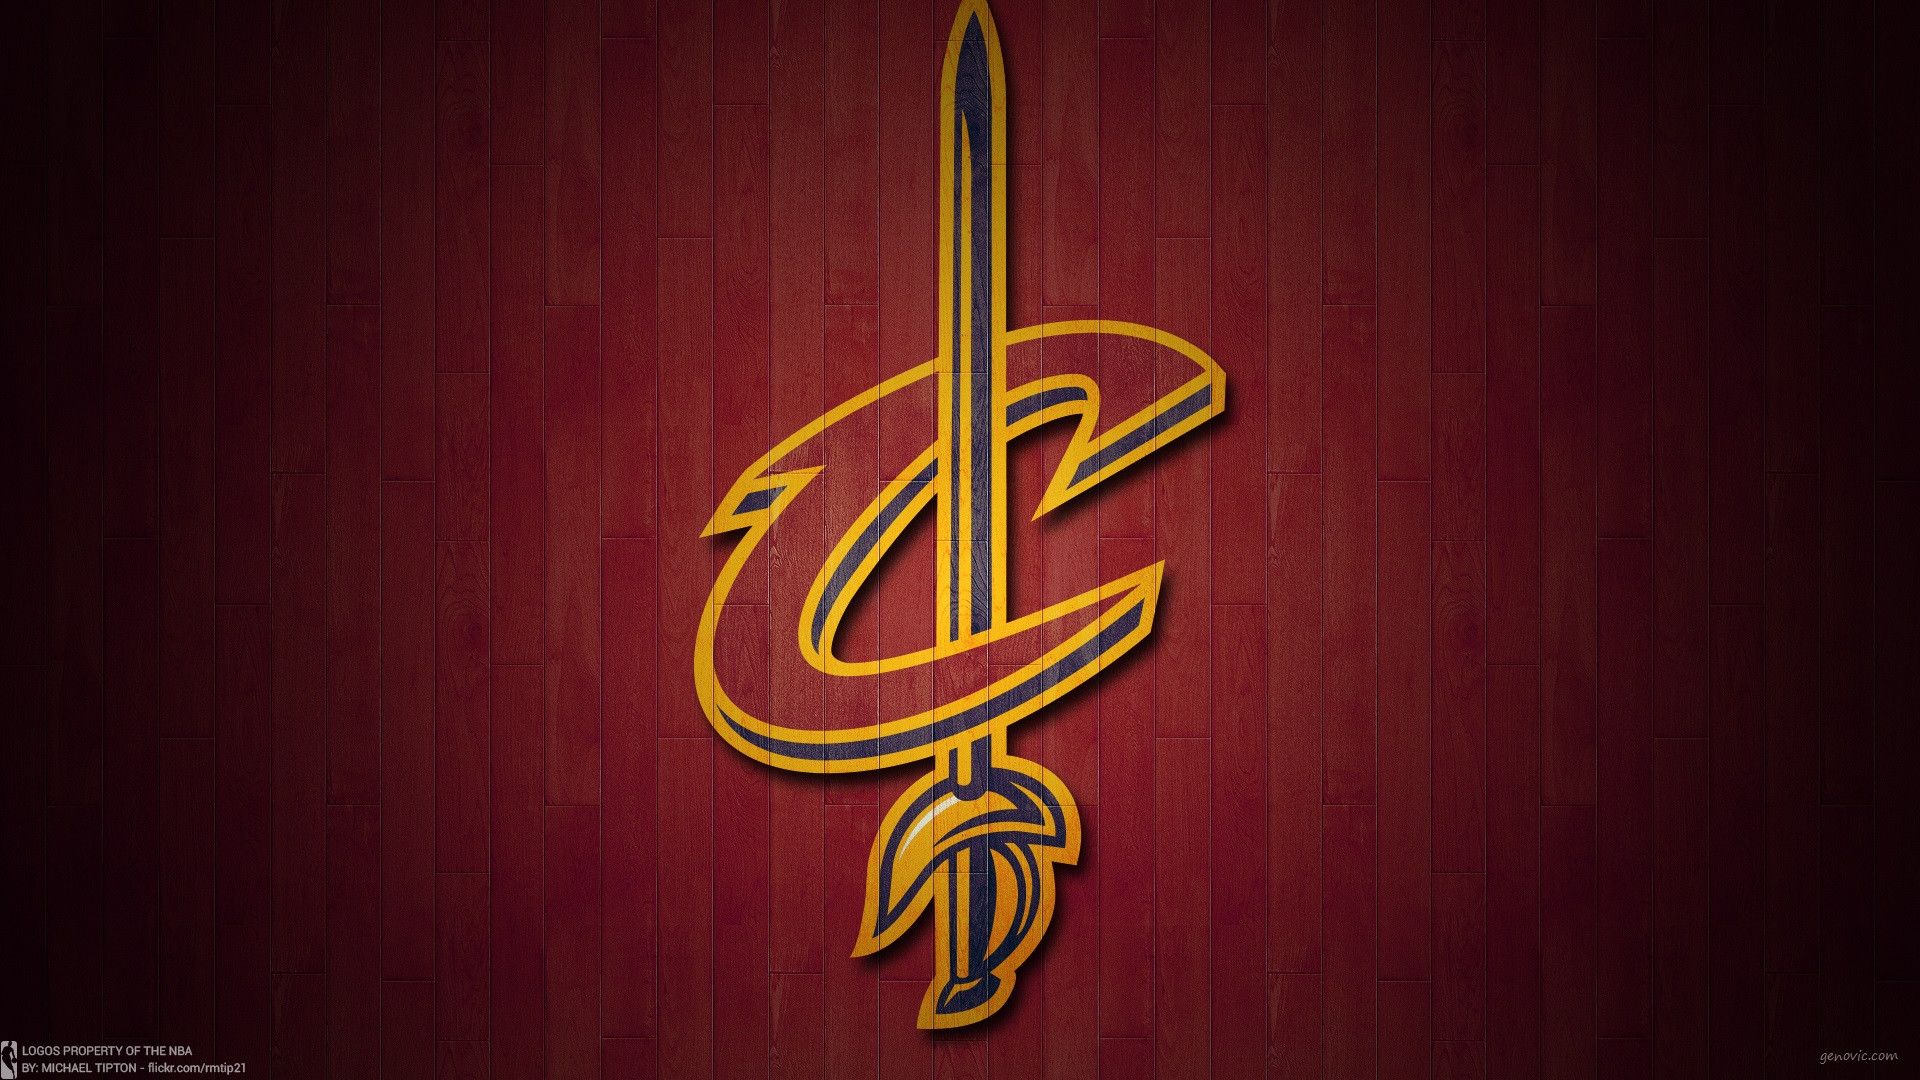 Cleveland Cavaliers Wallpaper On